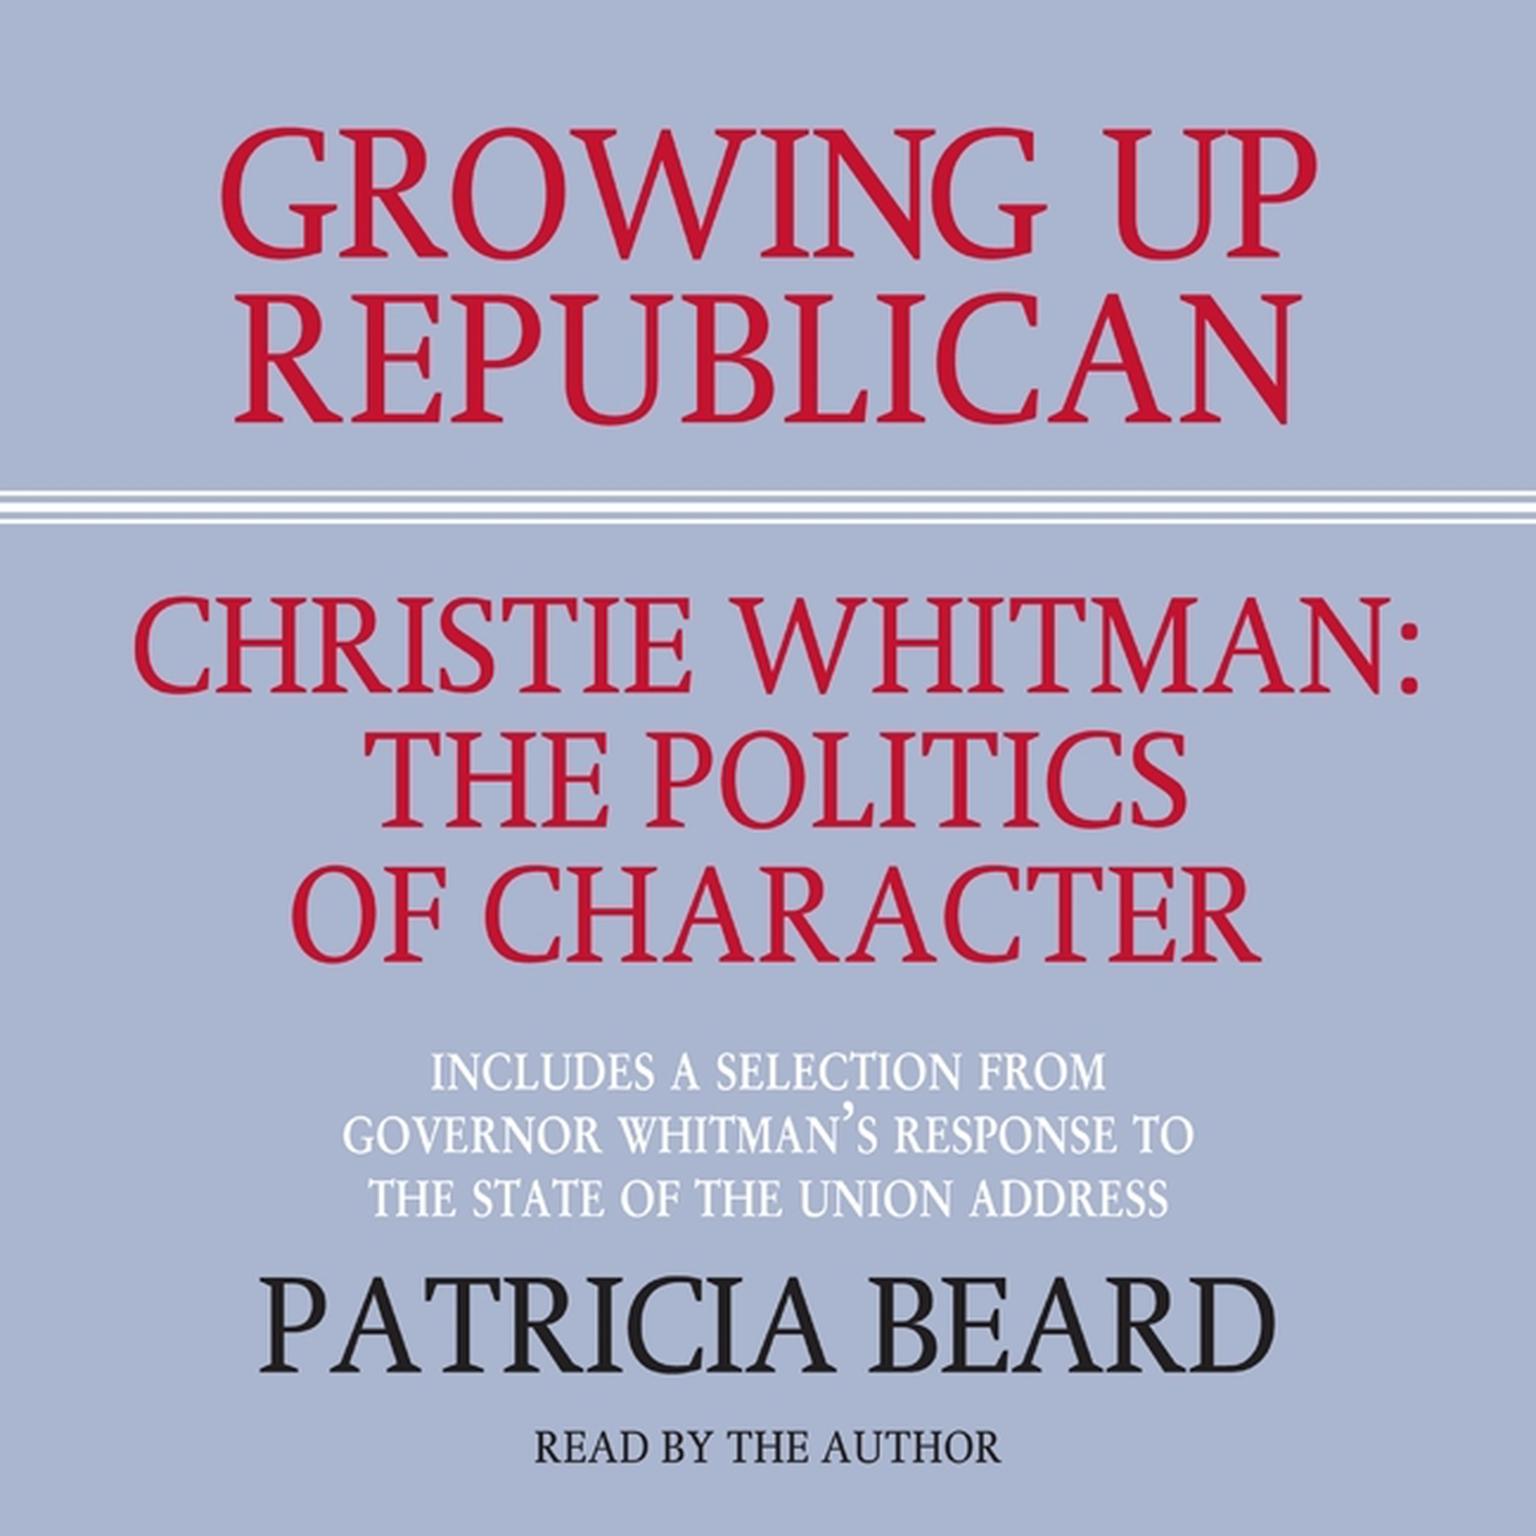 GROWING UP REPUBLICAN (Abridged): Christie Whitman: The Politics of Character Audiobook, by Patricia Beard